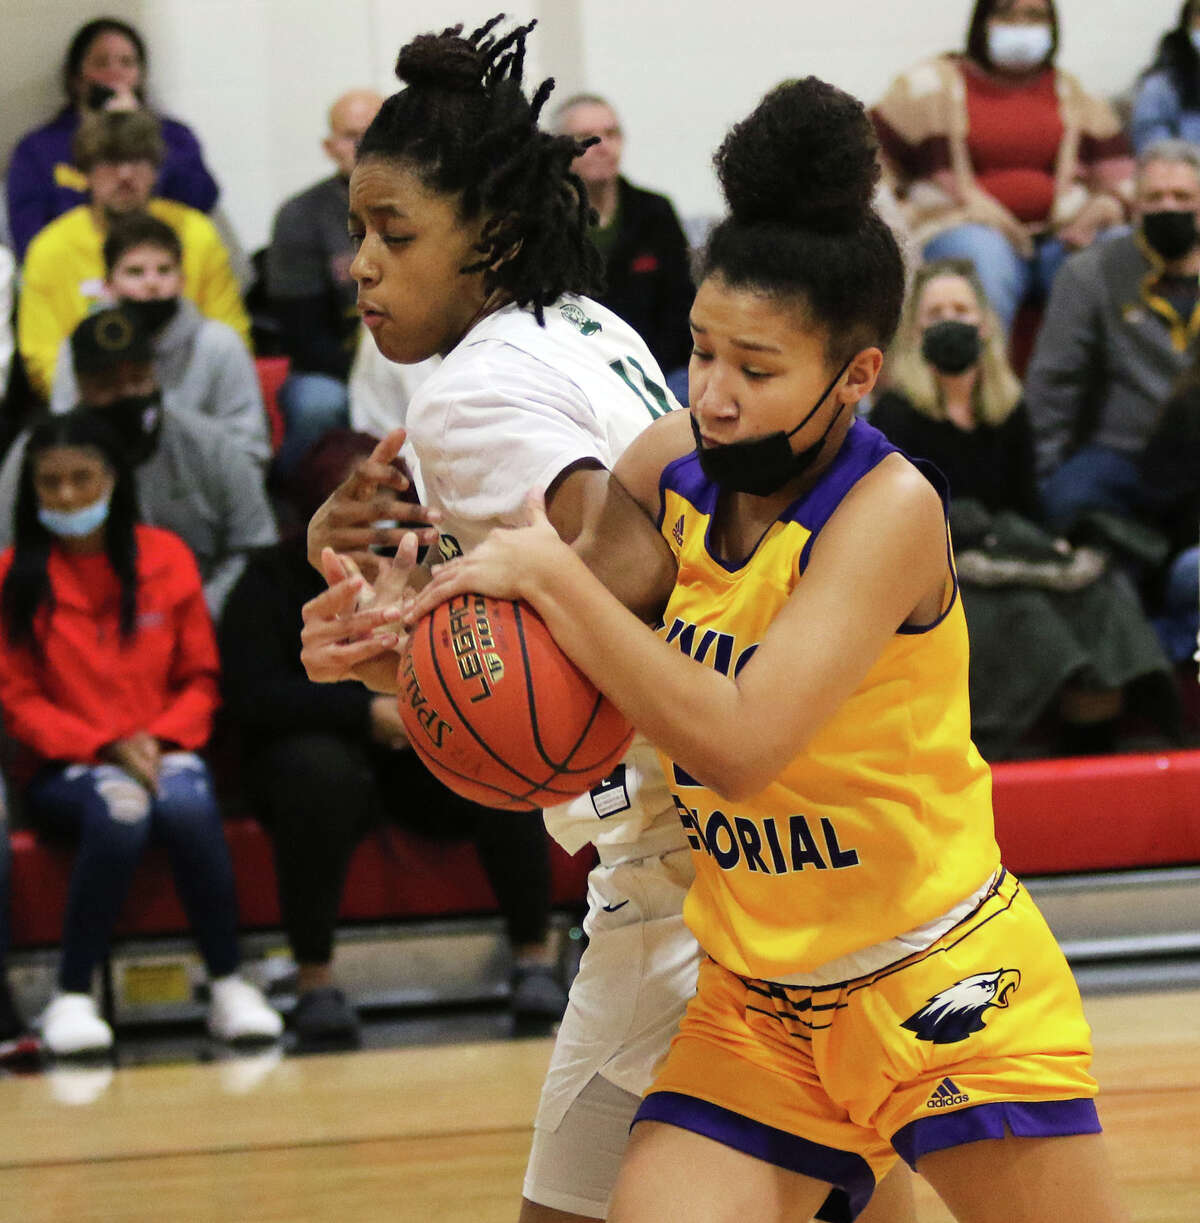 CM's Maya Tuckson (right) battles Whitfield's Brooklyn Rhodes to retain possession of the basketball Sunday night in the quarterfinals of the Visitation Christmas Tournament in St. Louis.